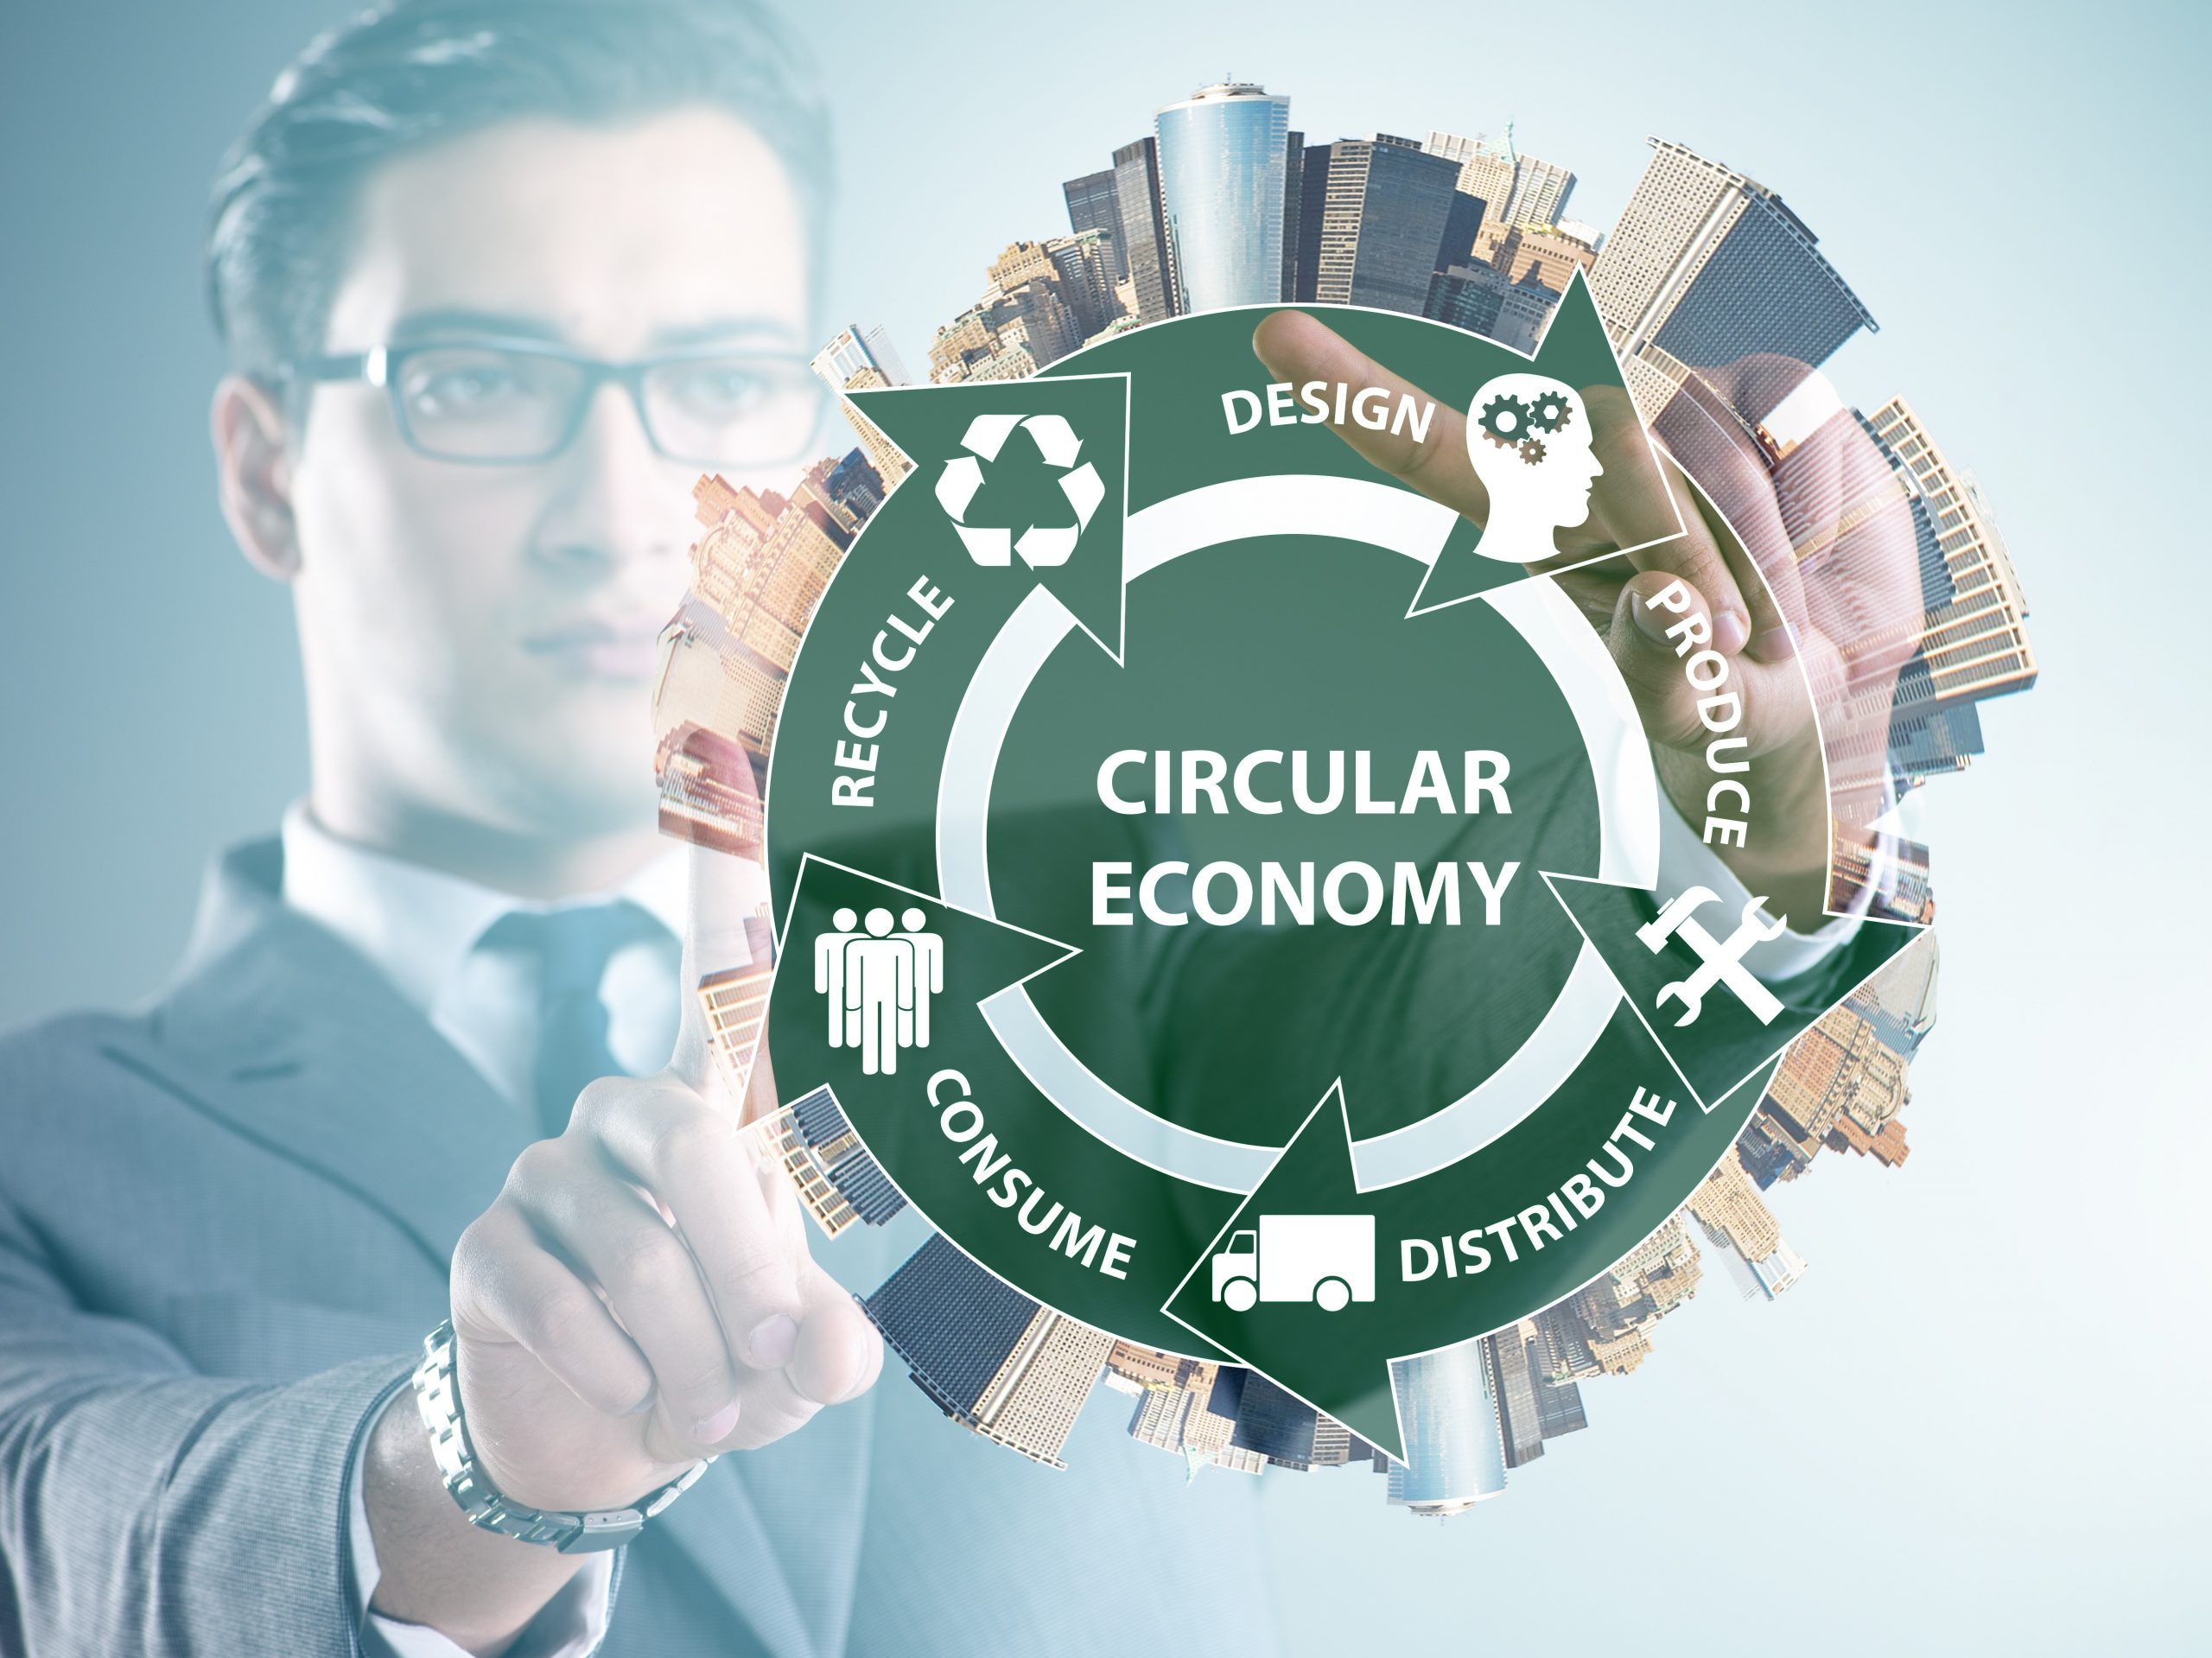 In this thought-provoking paper, Sydney academic and urban planner Steven Liaros contends that 'the transition to a fully circular economy will require a paradigm shift ... away from large-scale industrial agriculture to a decentralised network of circular food systems'.